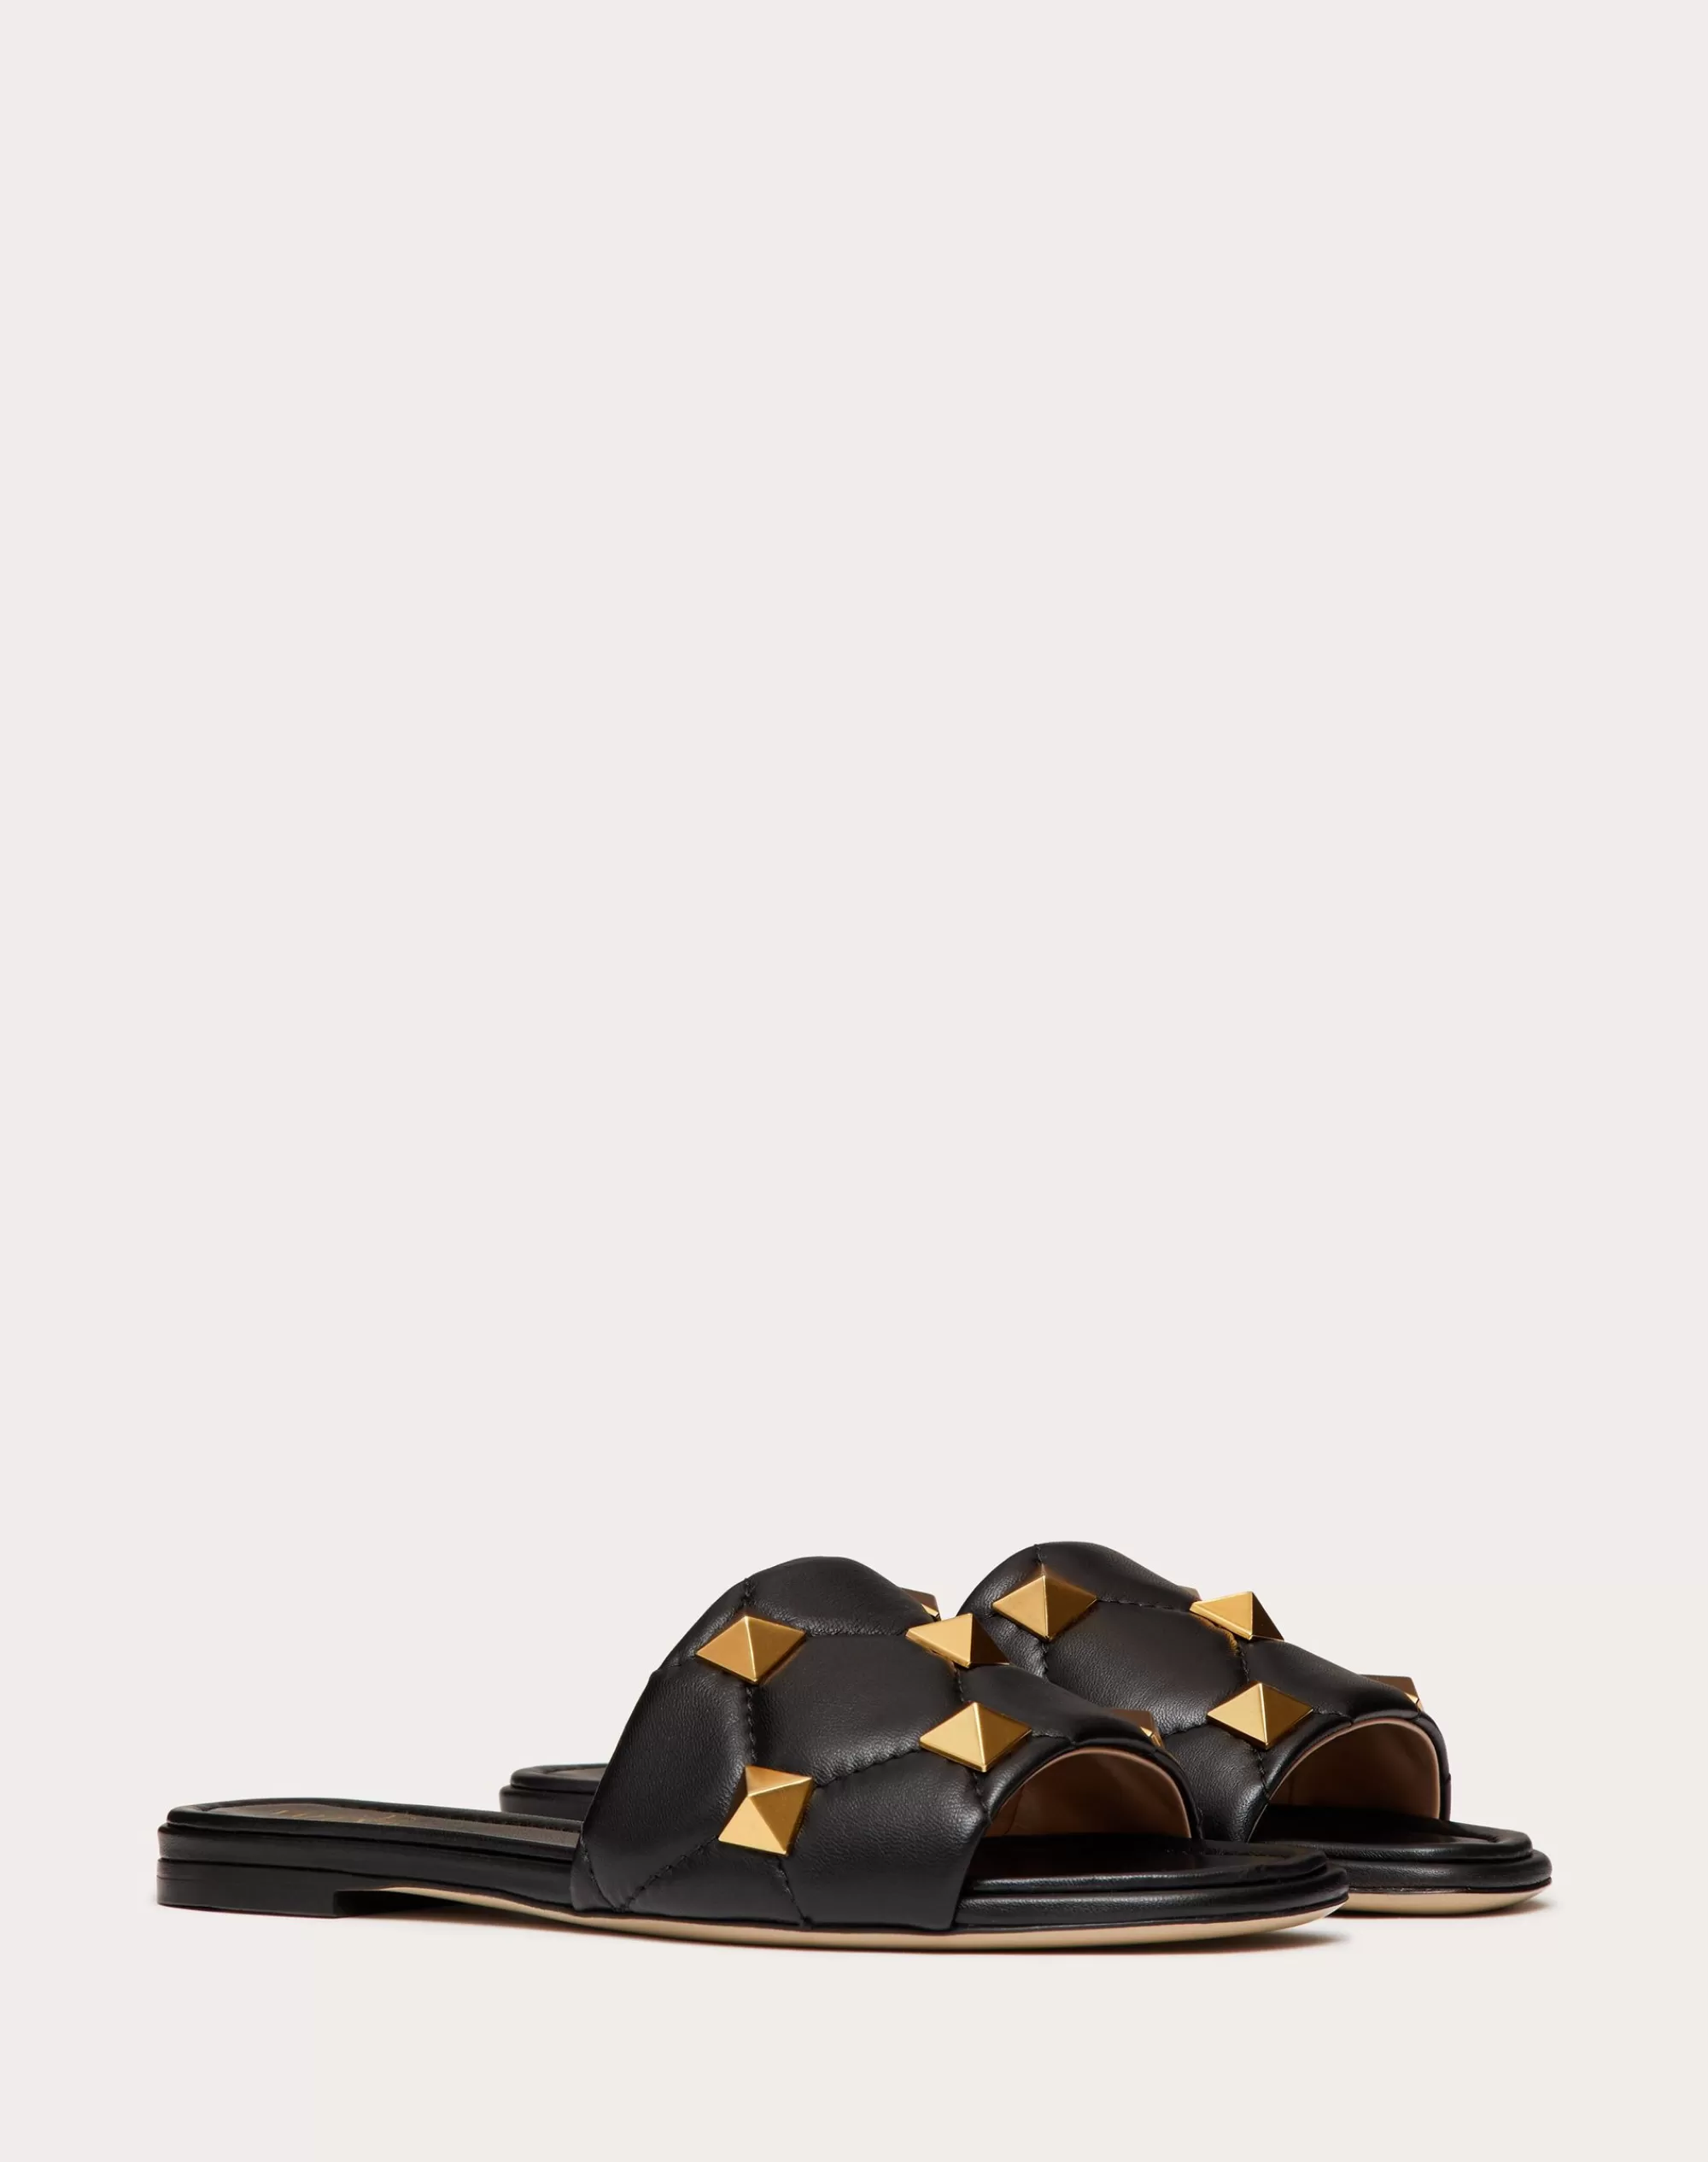 Valentino ROMAN STUD FLAT SLIDE SANDAL IN QUILTED NAPPA Outlet